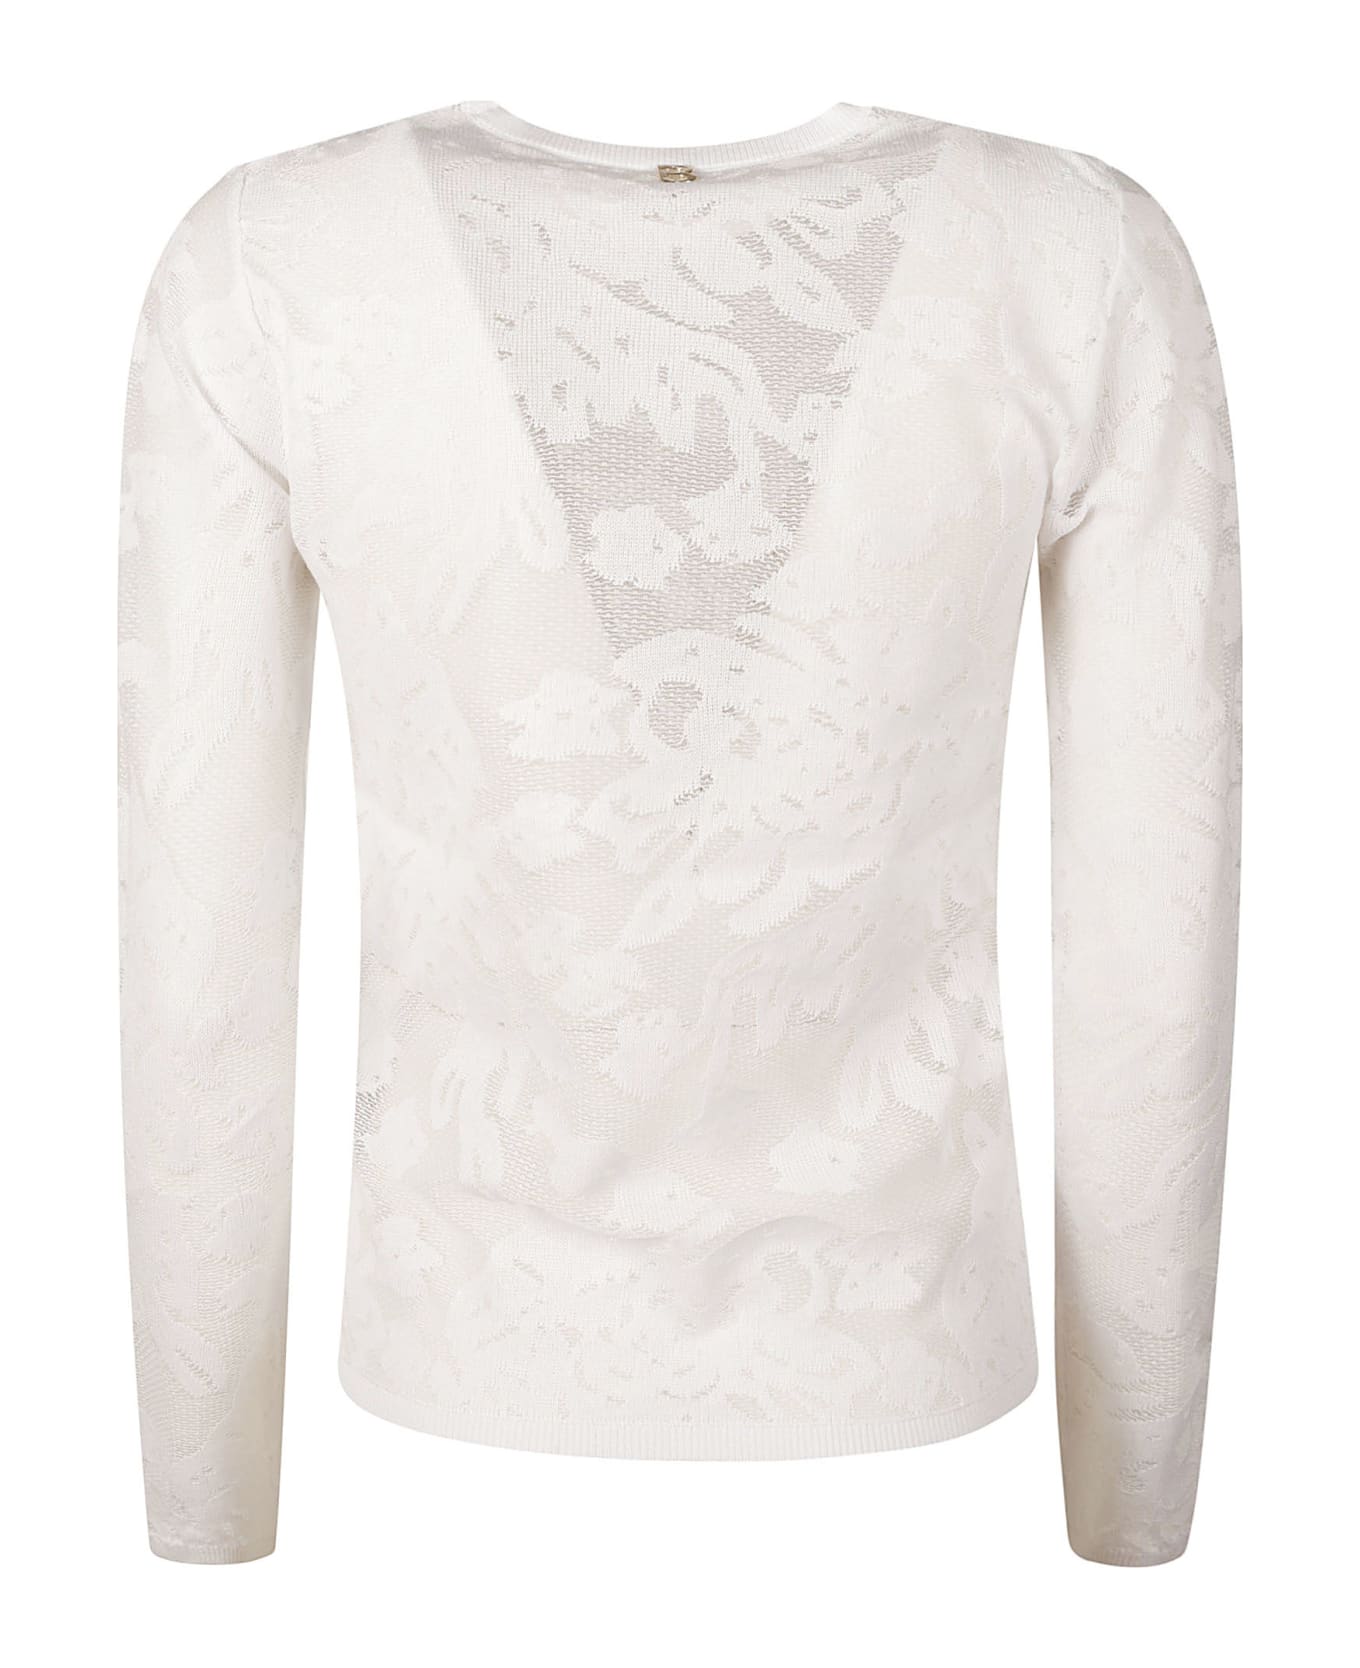 Blugirl Long-sleeved Floral Lace Top - Bianco